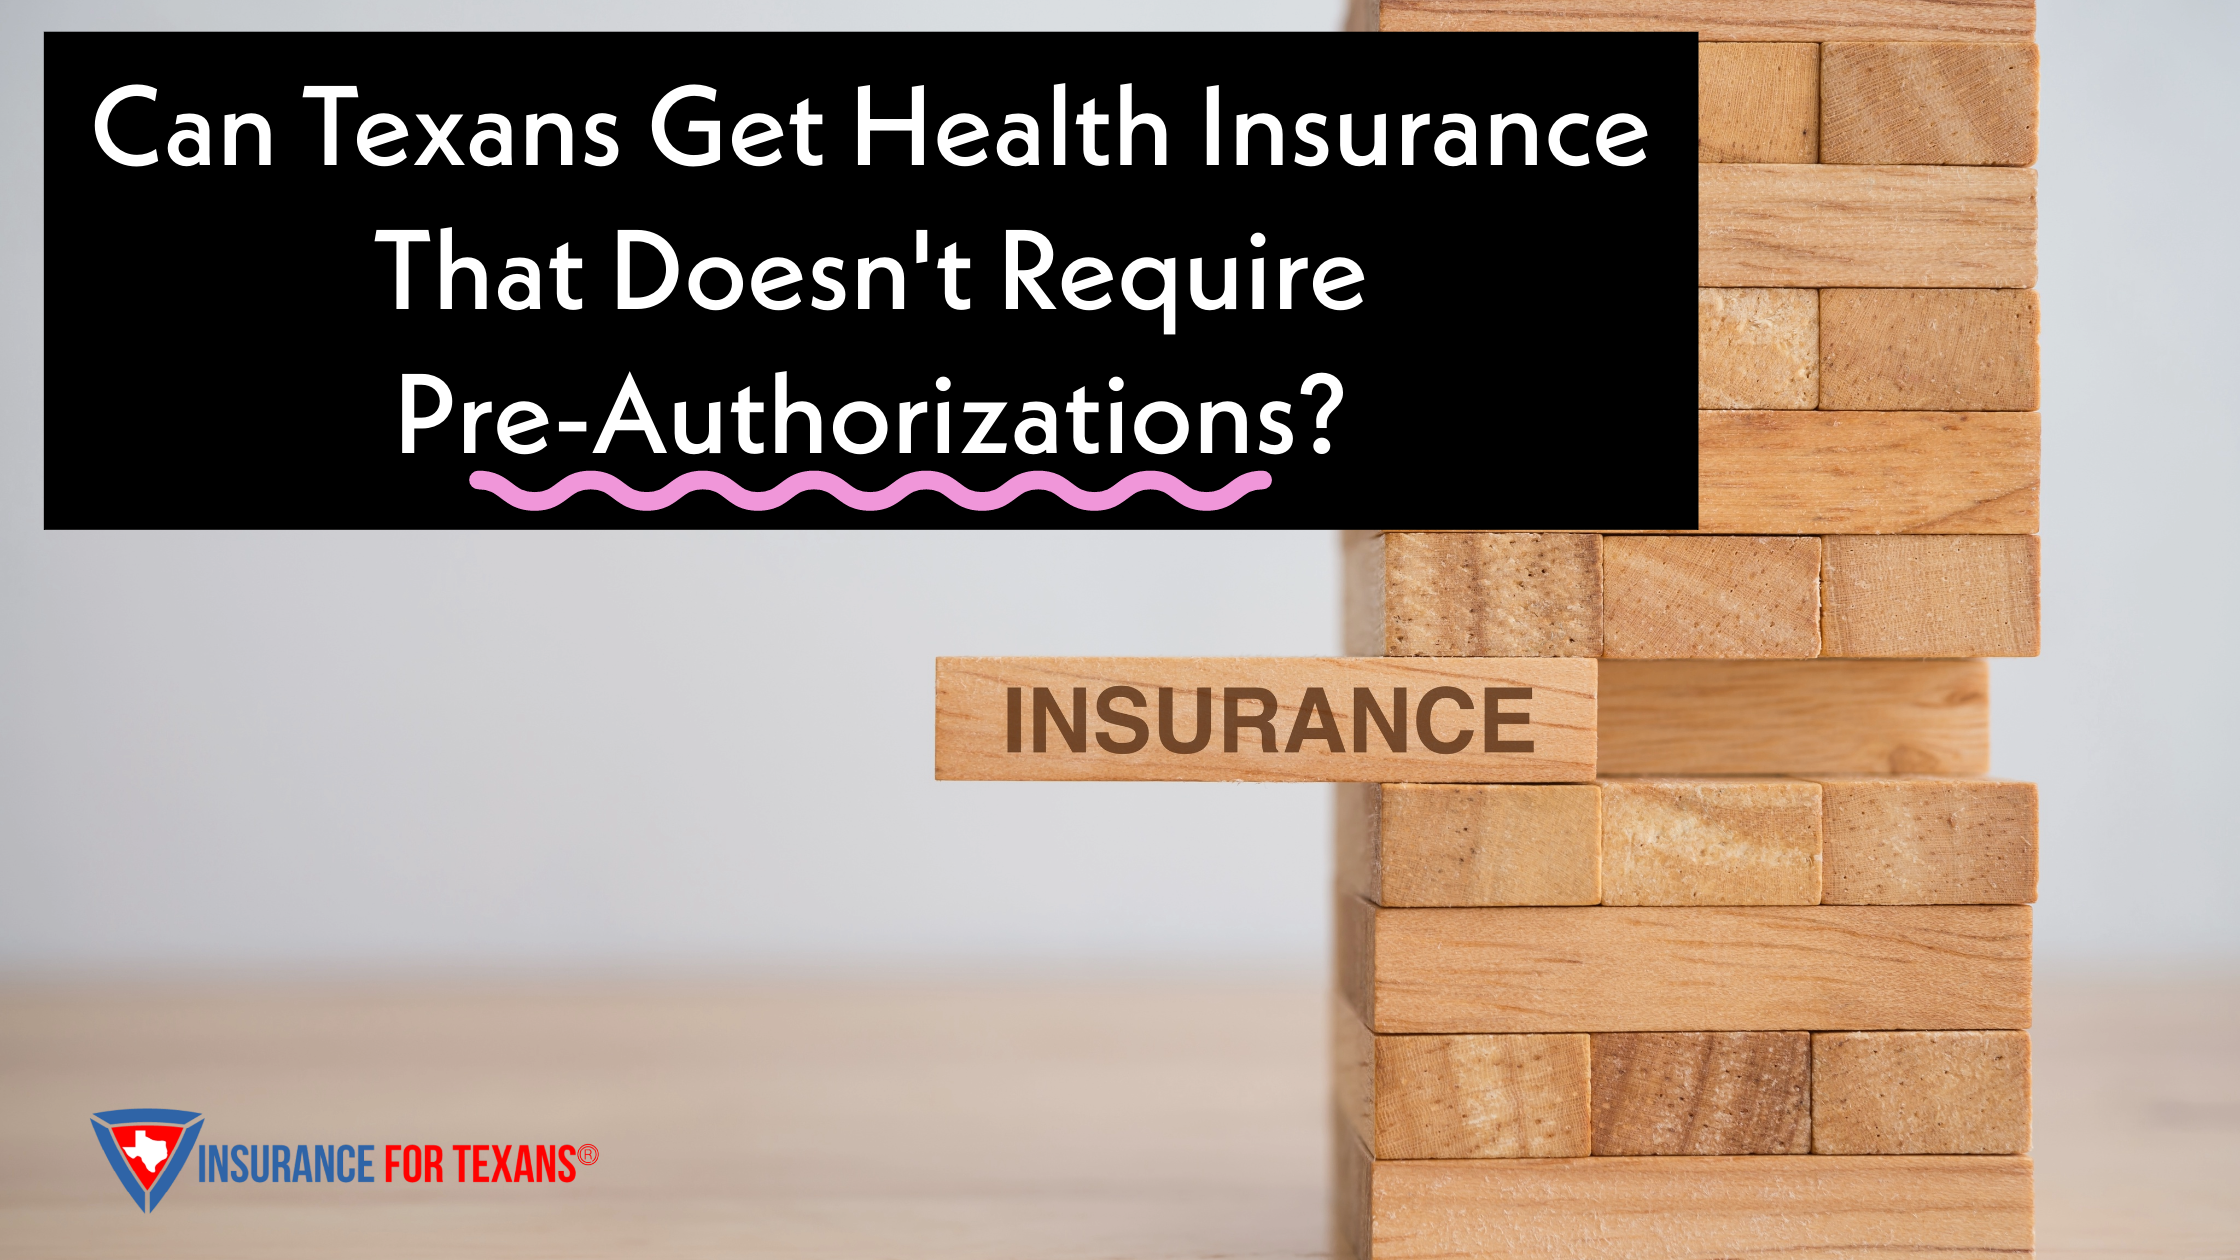 Can Texans Get Health Insurance That Doesn't Require Pre-Authorizations?